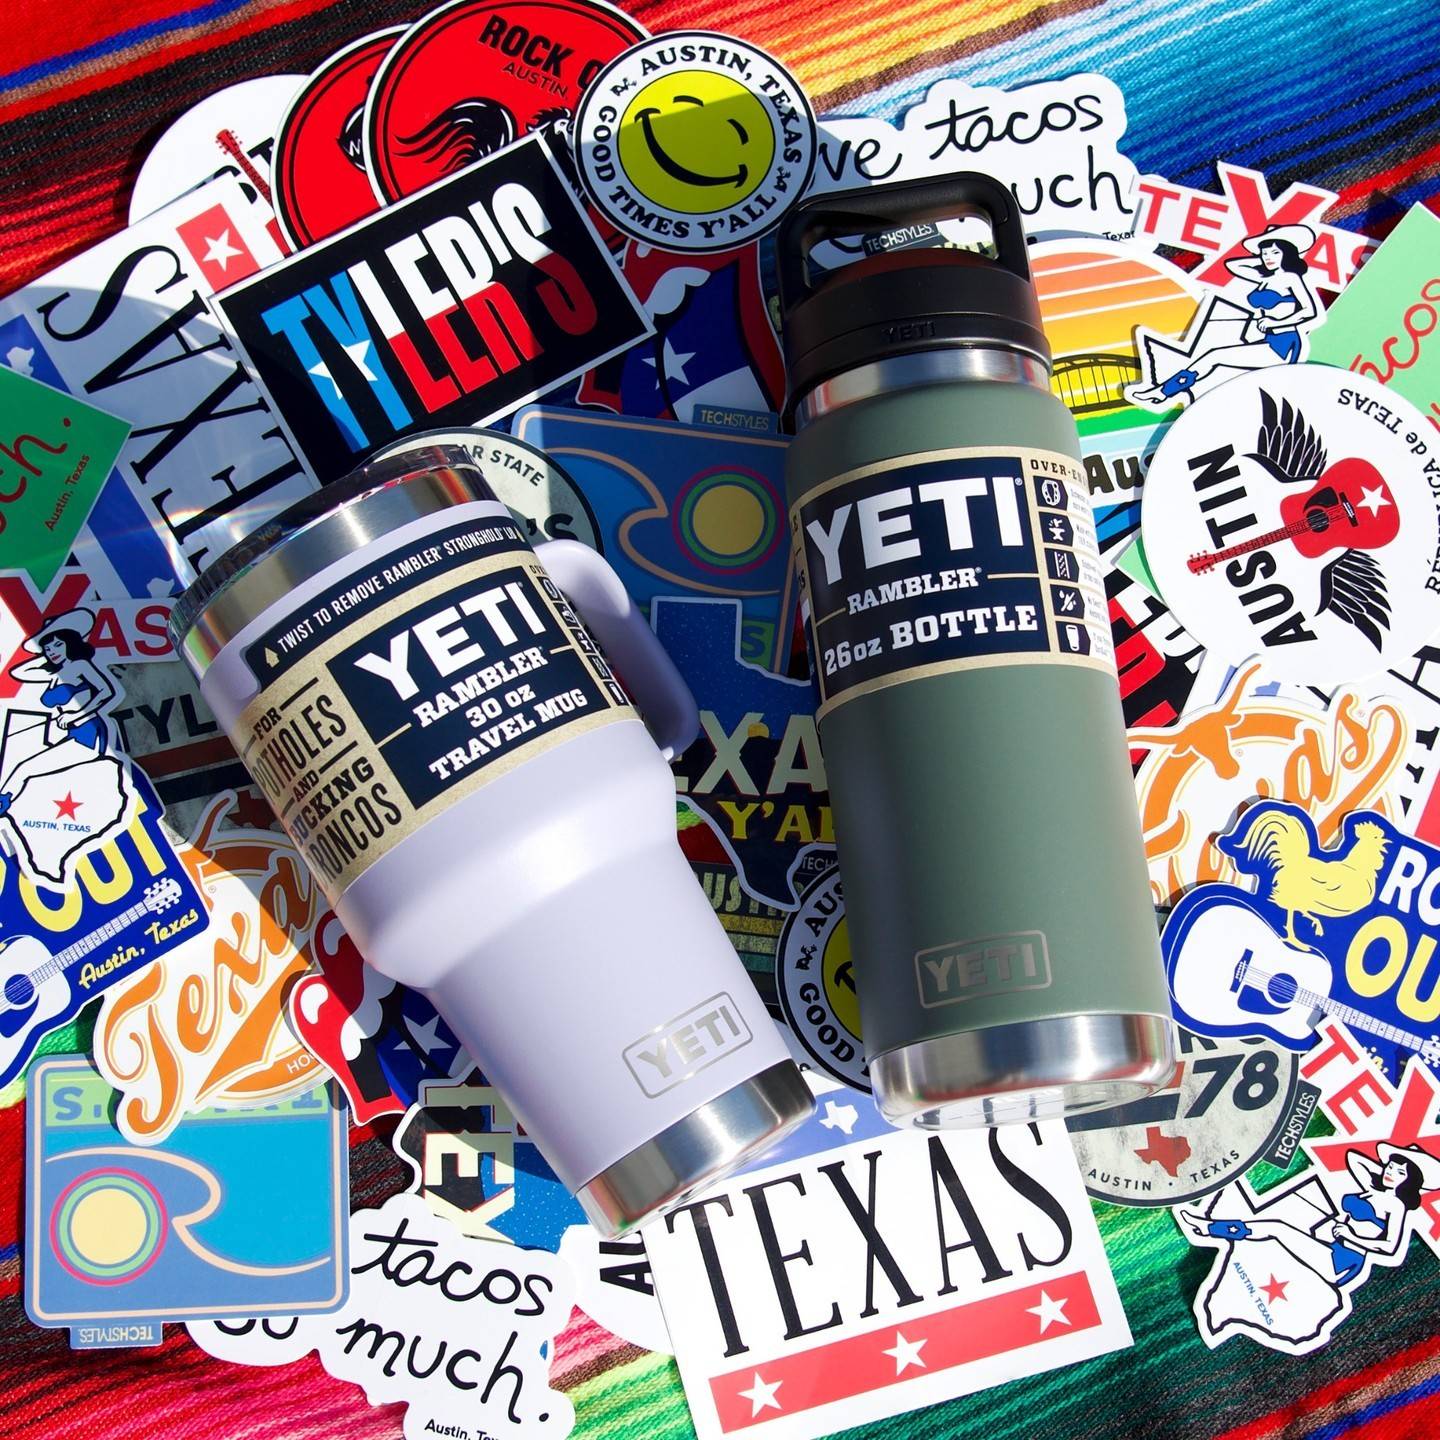 Case display of Yeti cups on top of Texas Essential stickers